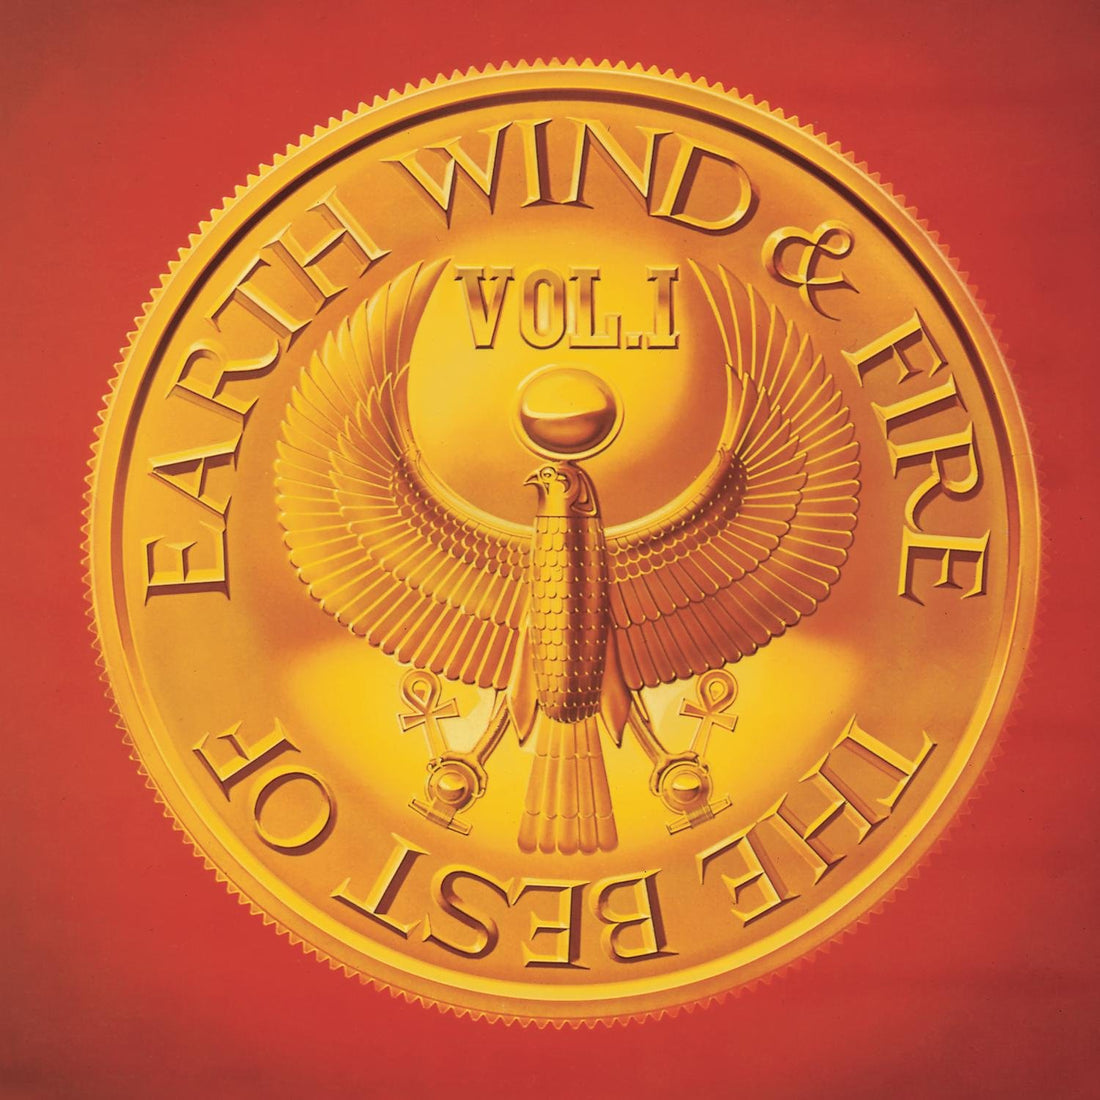 Earth Wind & Fire- The Best of Vol. 1